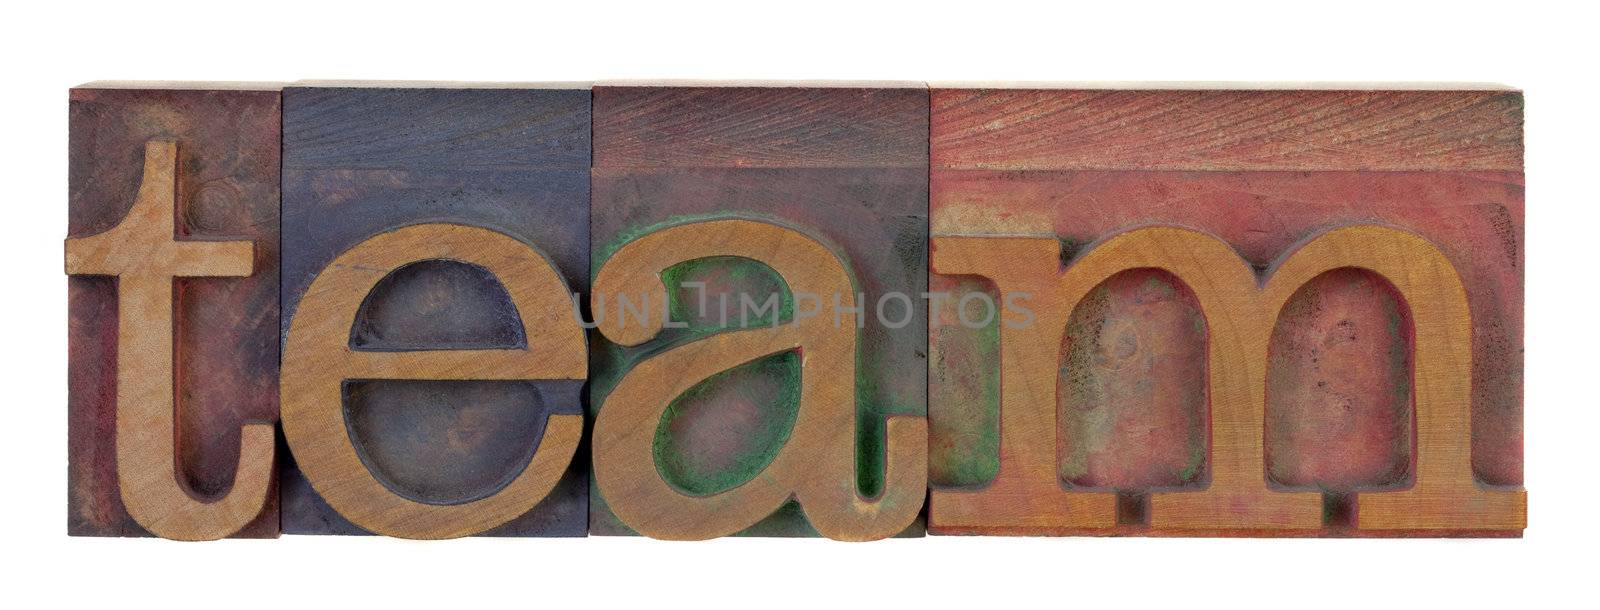 the word lteam in vintage wooden letterpress type blocks, stained by color ink, isolated on white